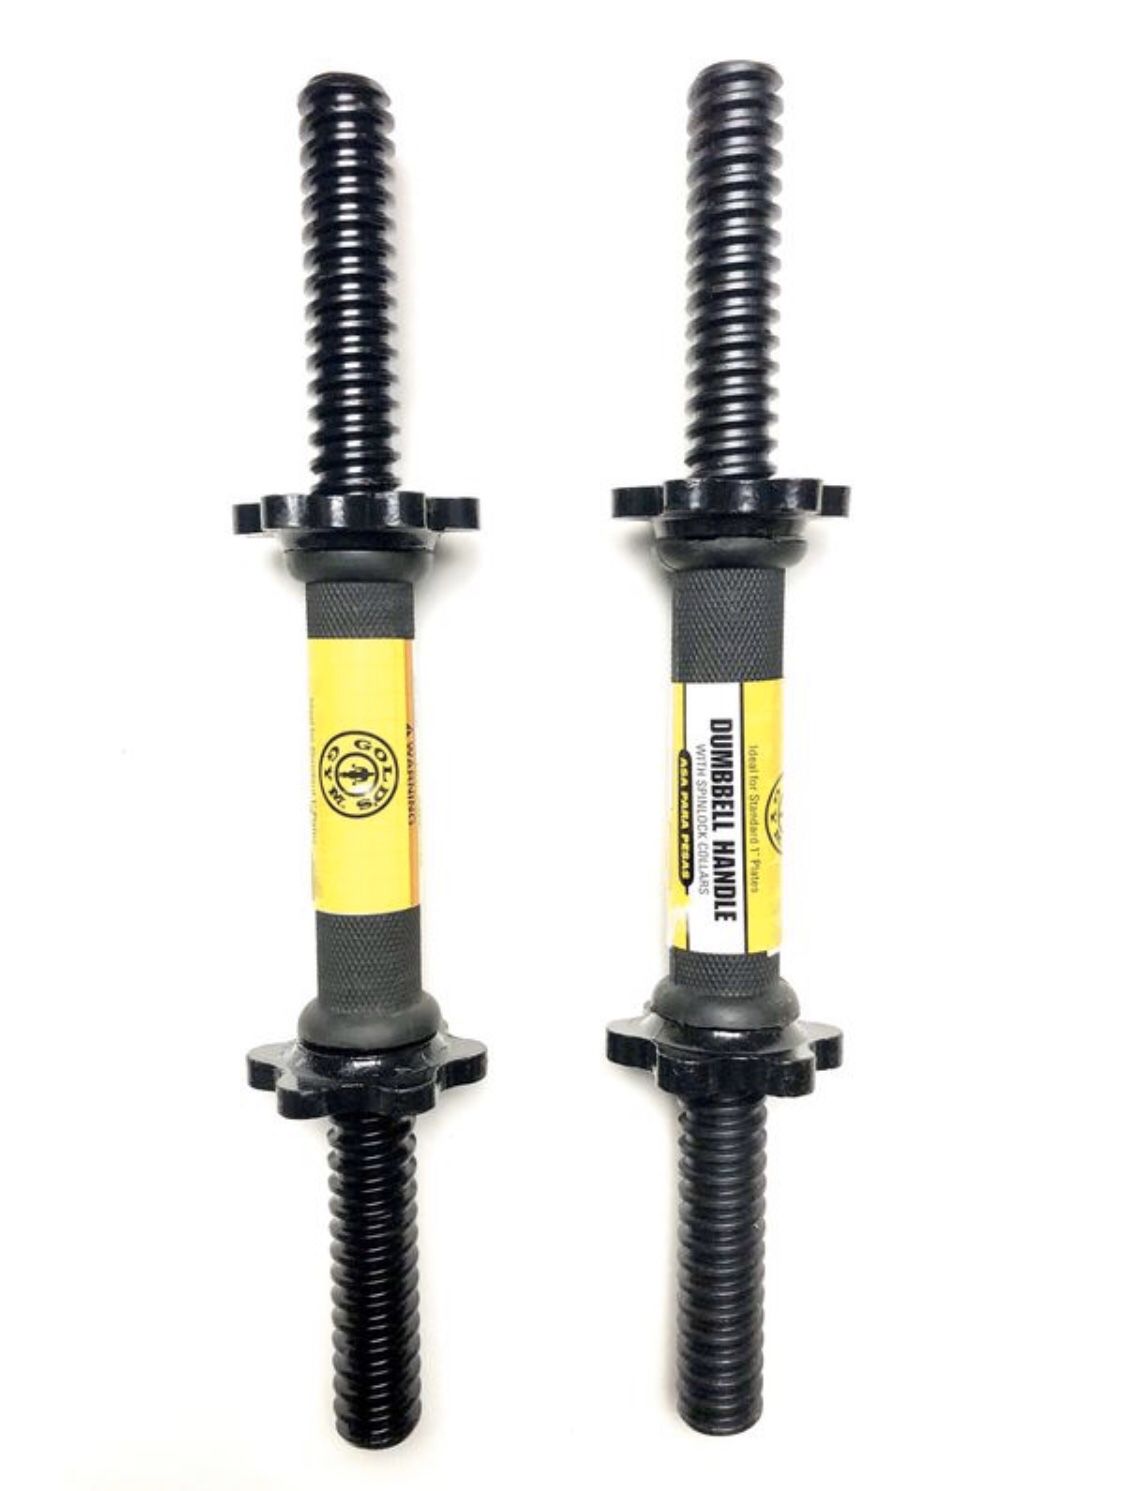 Set of 2 Golds Gym Dumbbell Handle w/Spinlock Collars ideal for standard 1"plate 